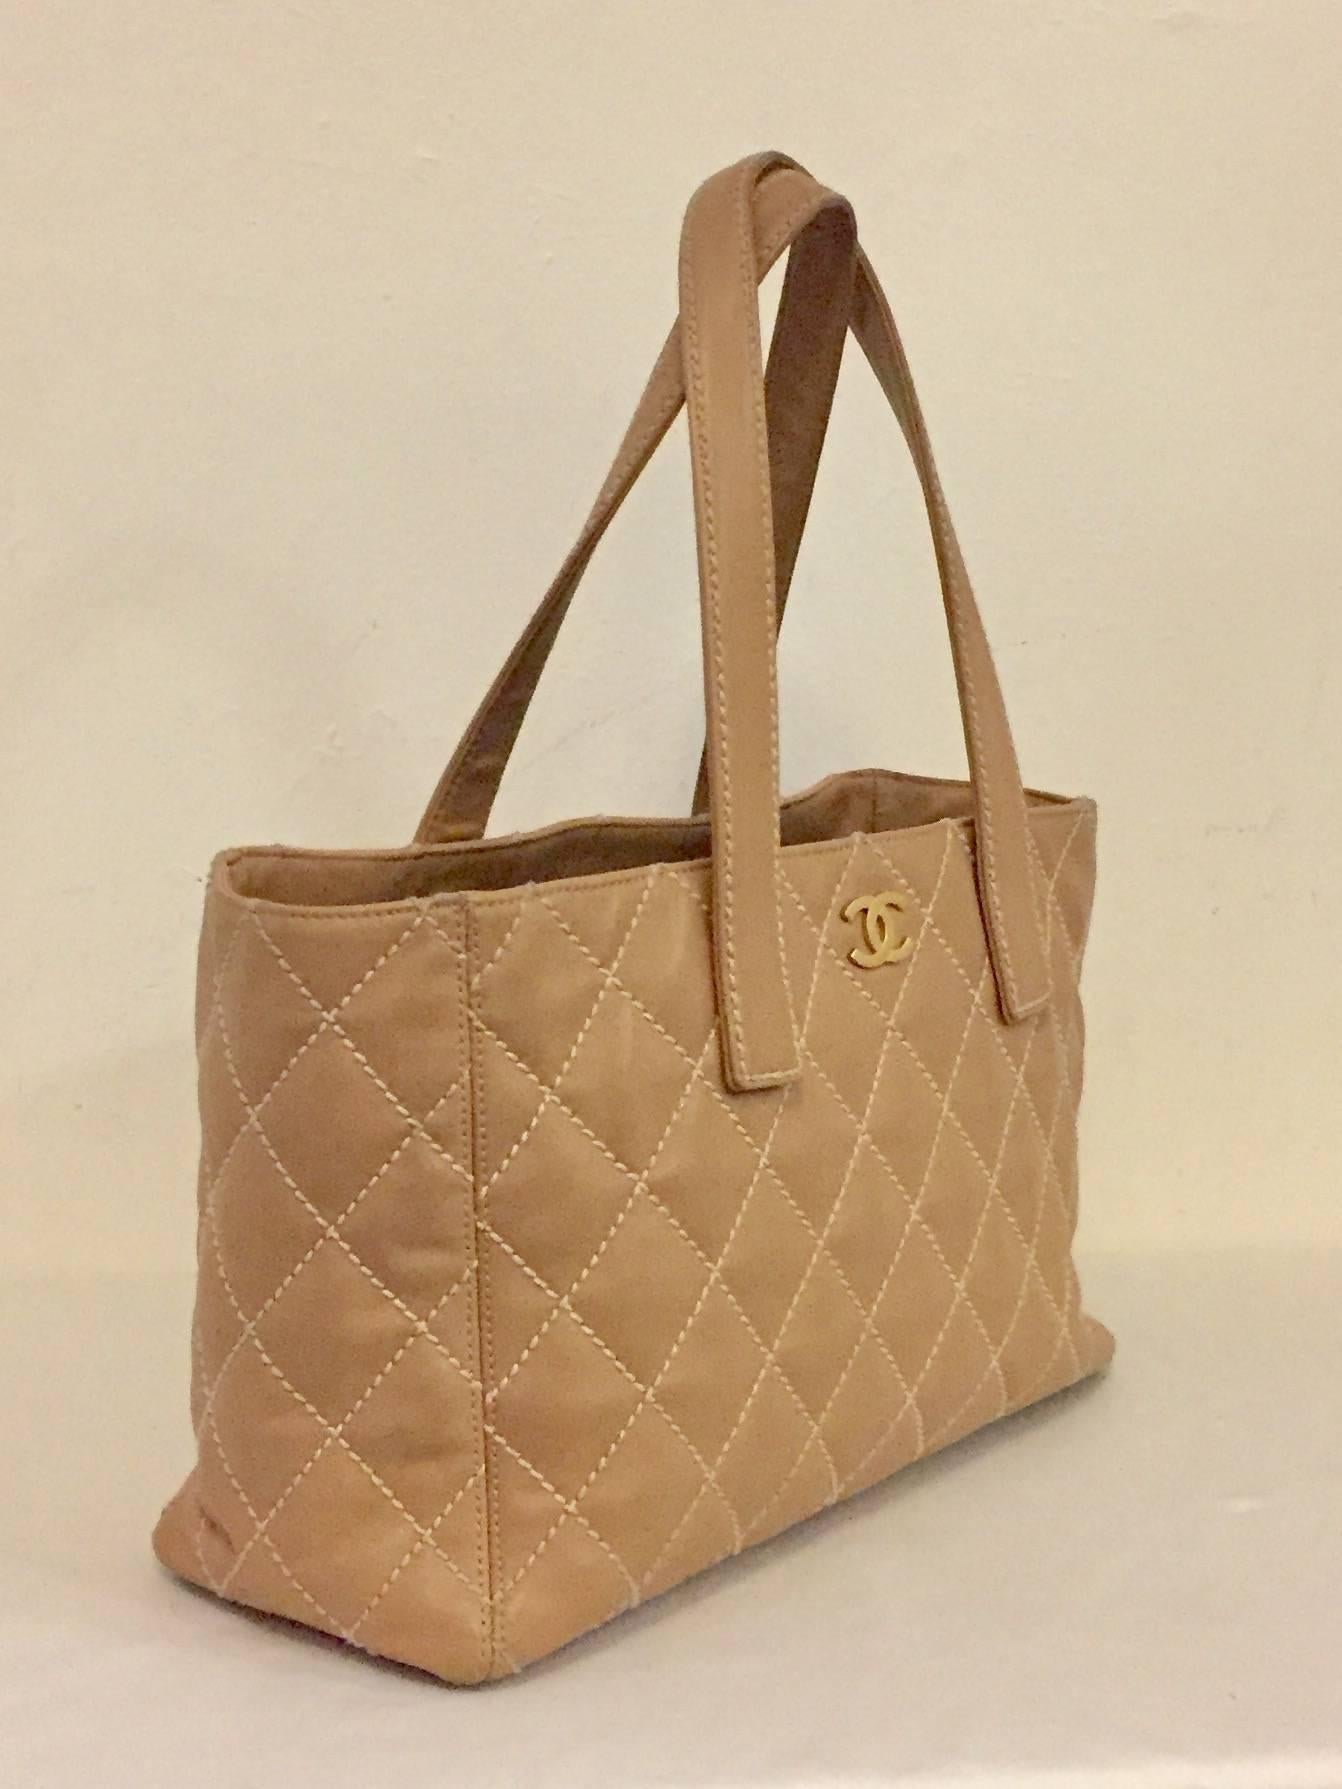 Chanel Tan Diamond Quilted Leather Tote W Contrast Stitching Serial 8068065 3